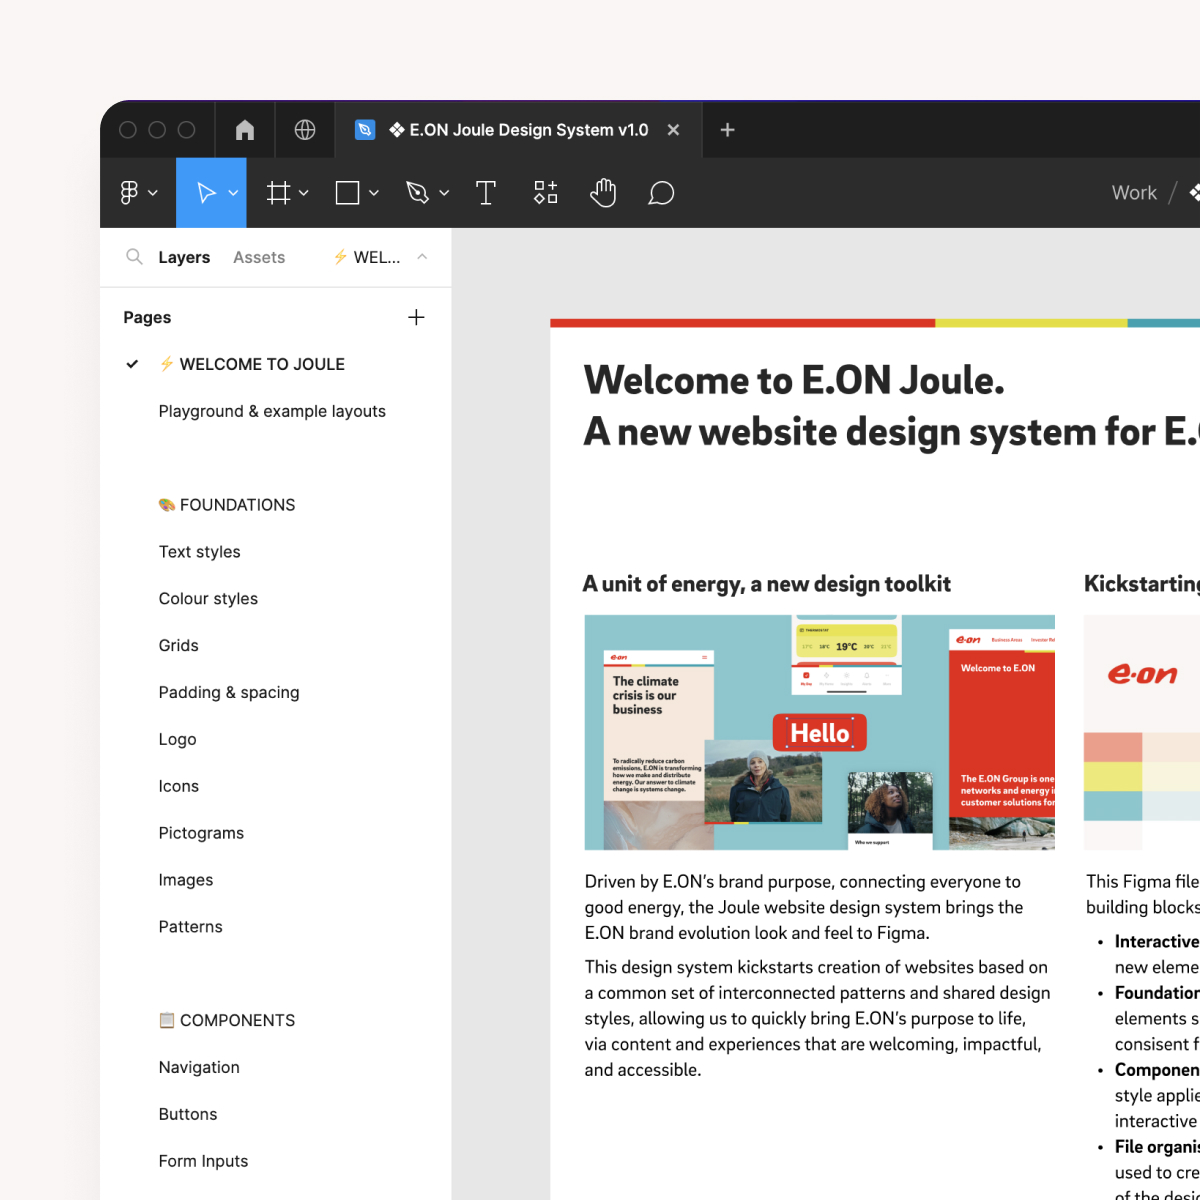 A screenshot of the welcome page of the E.ON Joule design system